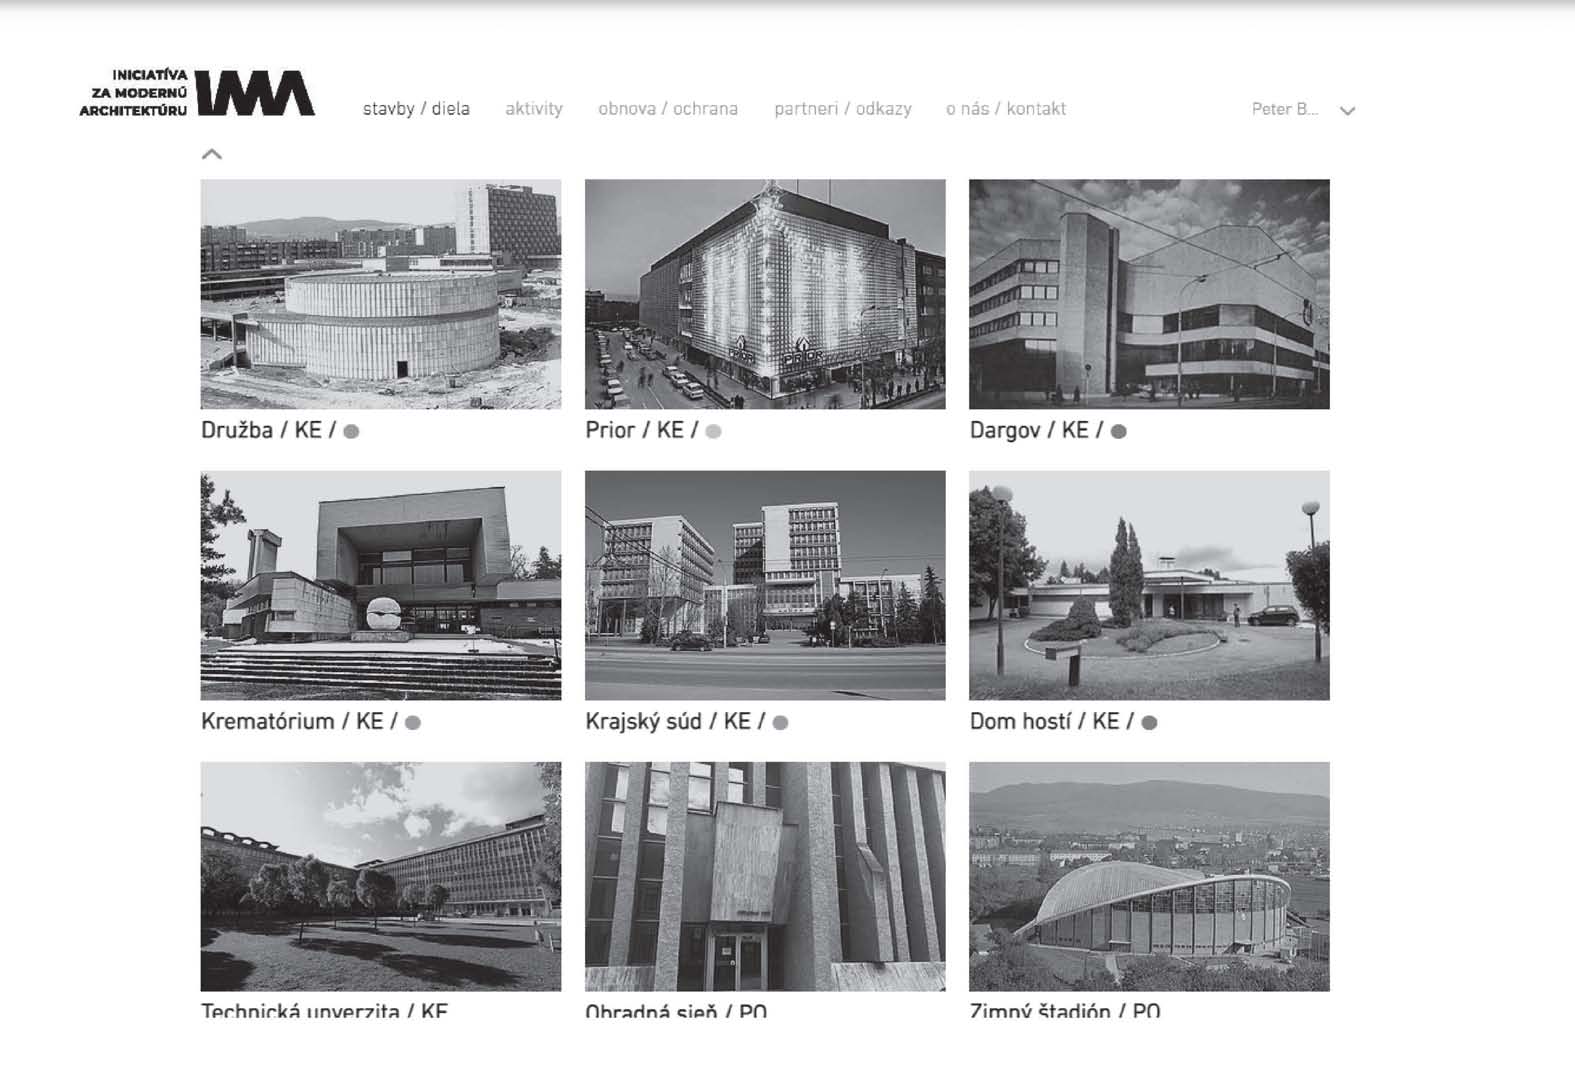 Archimap 2/20: Mapping the Post-war Socialist Architecture in Košice